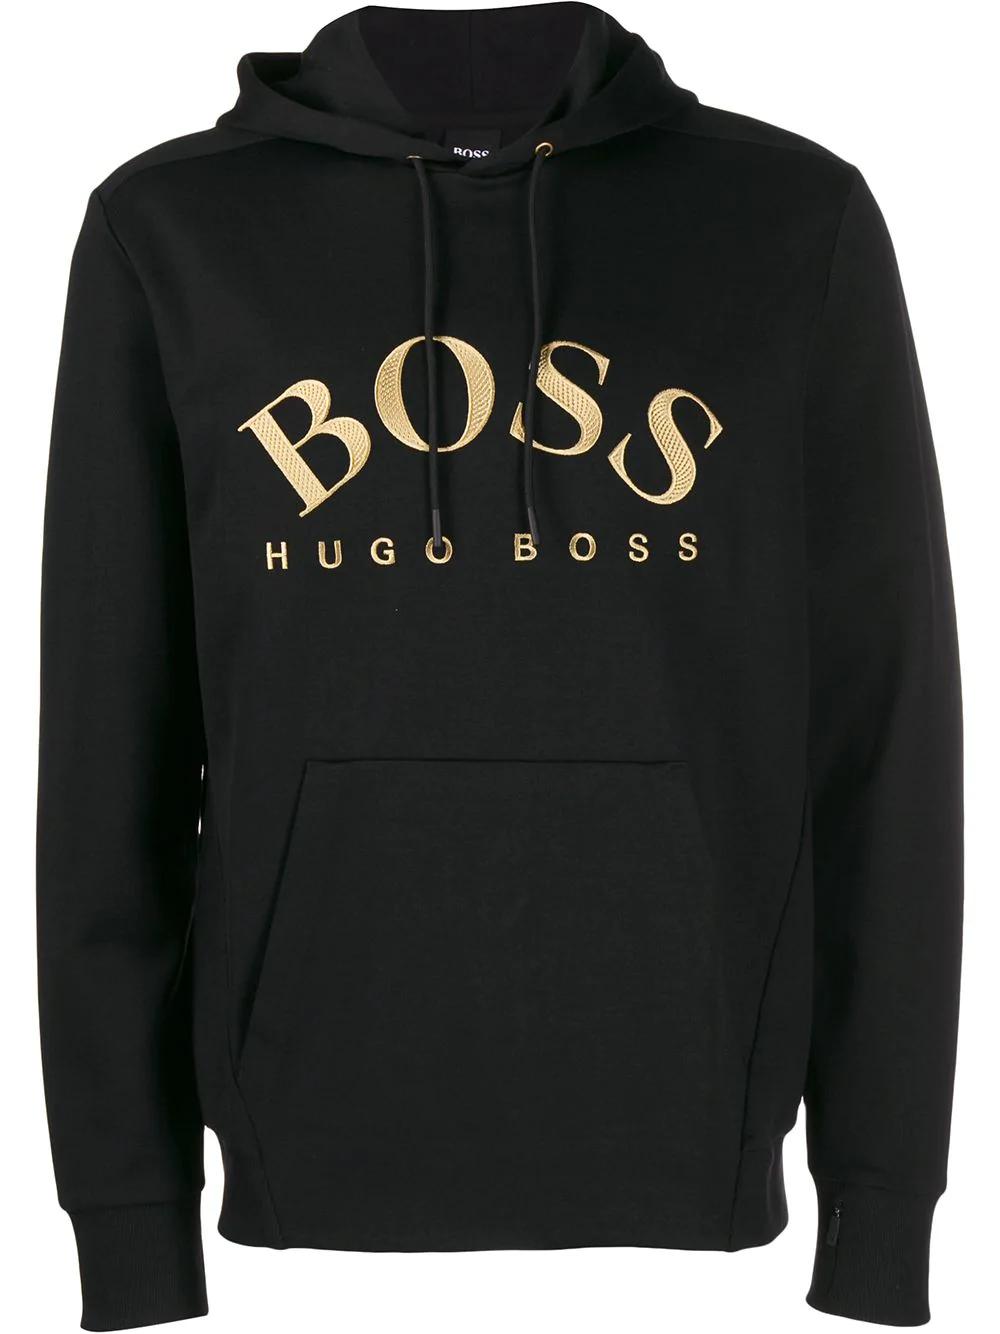 BOSS by HUGO BOSS Cotton Curved Logo Soody Hoodie in Black/Gold (Black) for  Men - Lyst